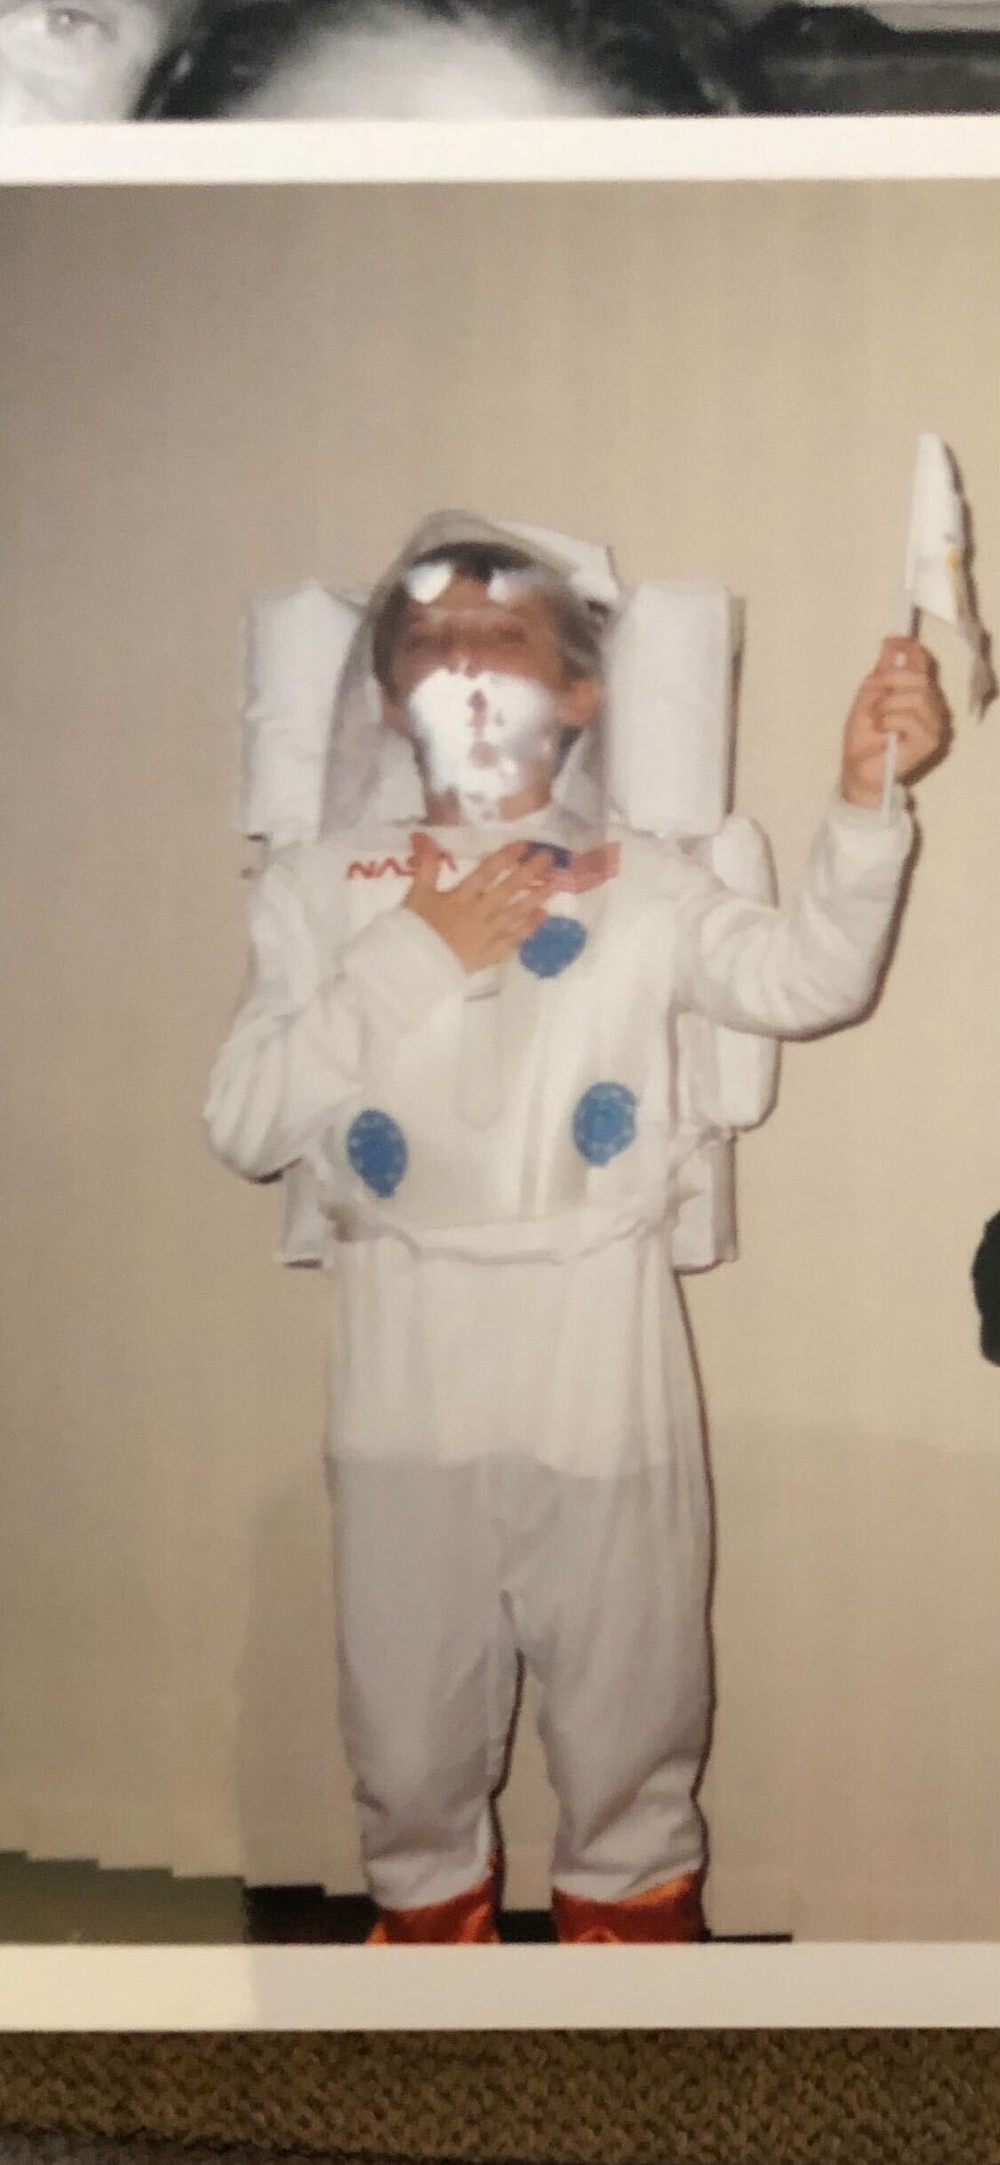 Young dressed as a NASA astronaut for Halloween at the age of seven.